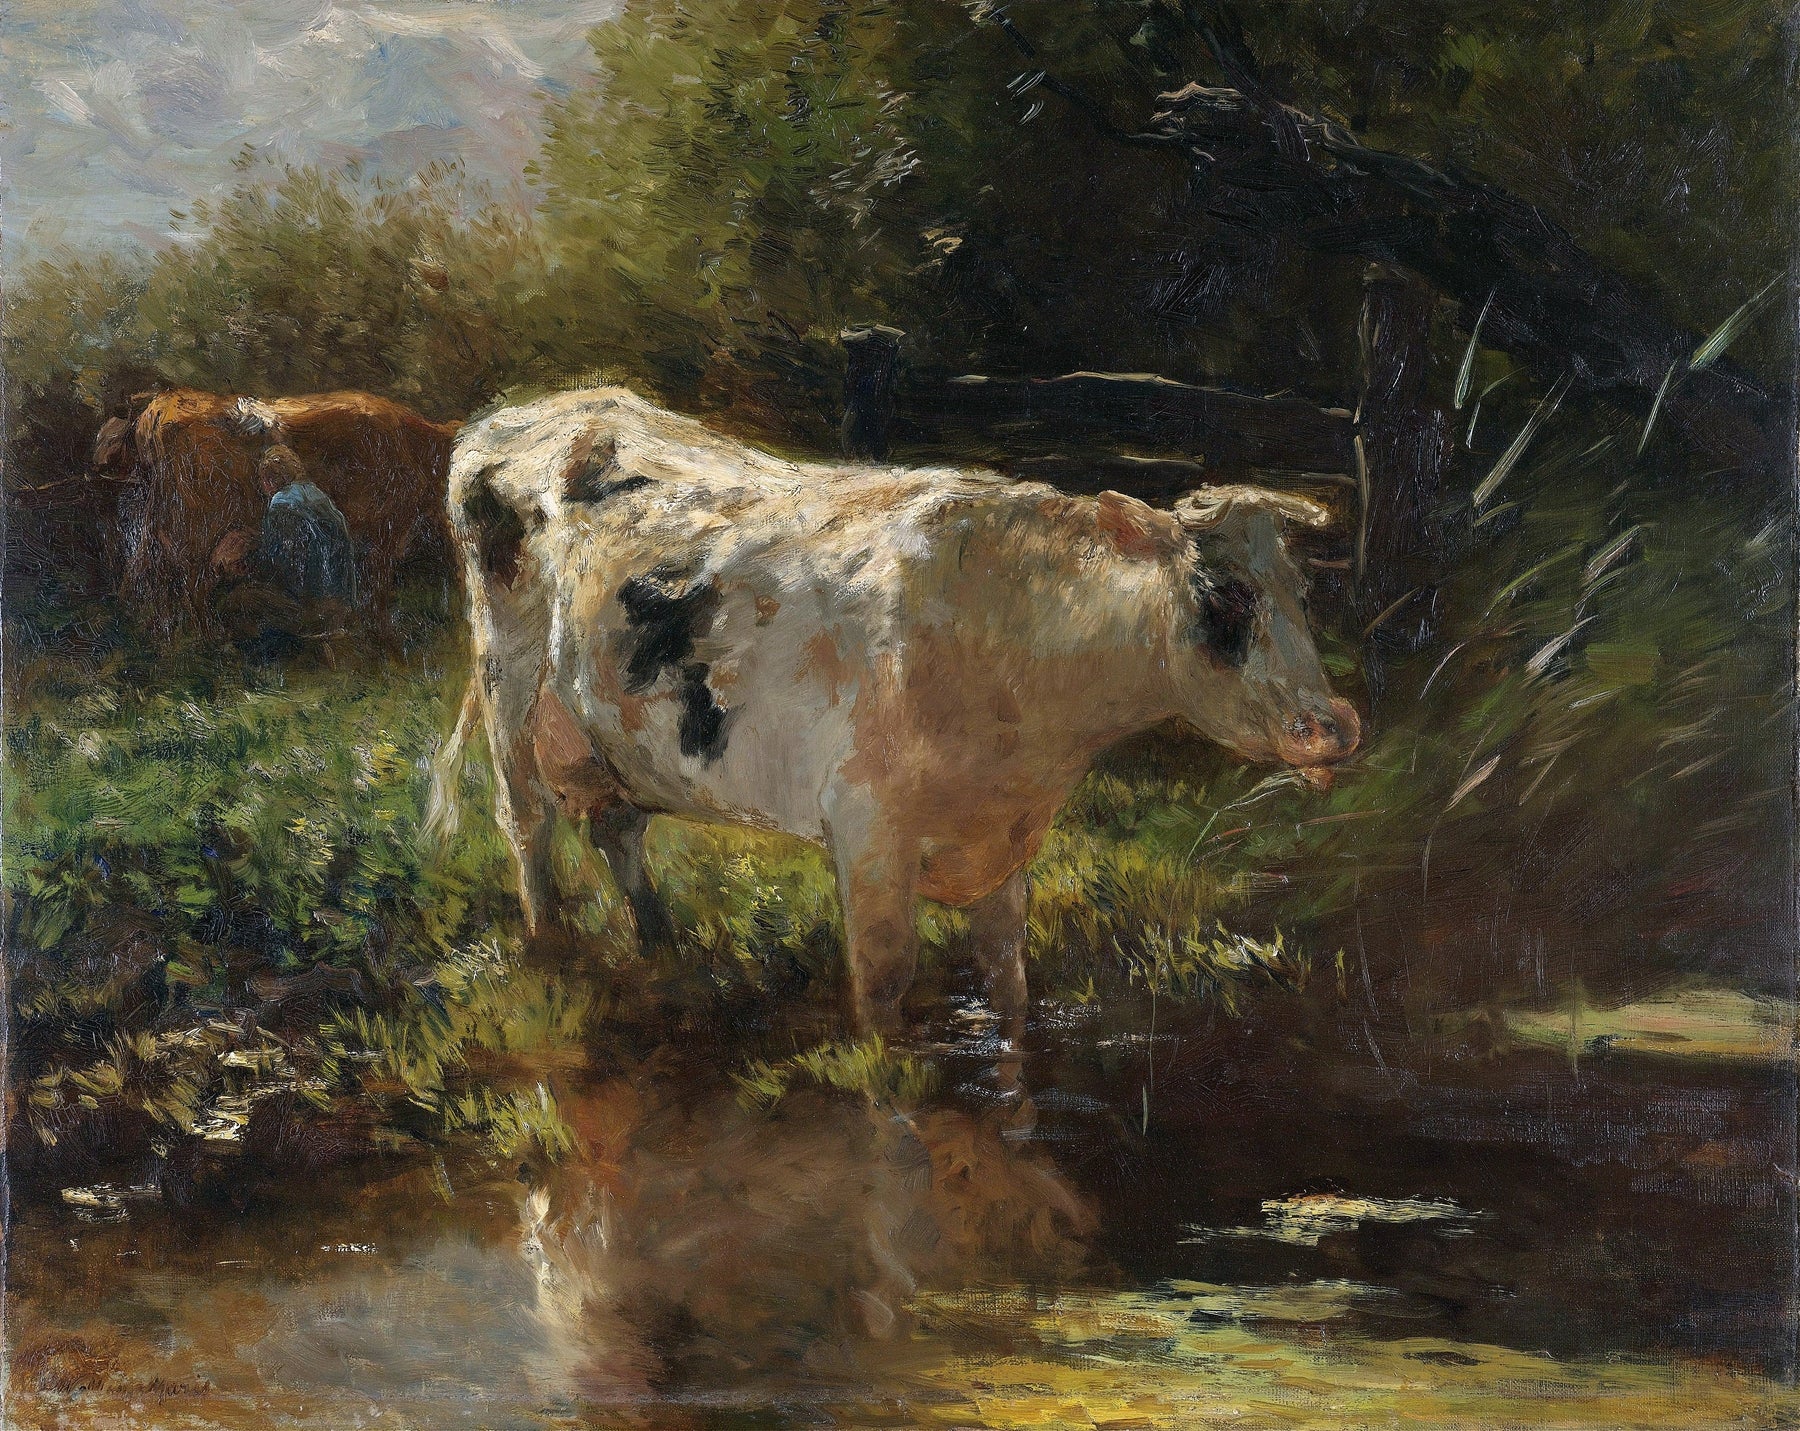 Close-up view of a vintage art print titled 'Spotted Cow,' showcasing the detailed depiction of a black-and-white cow near a pond. The soft brushstrokes and rich colors capture the serene countryside setting. The image includes the text 'Timberlea Interiors Vintage Art Print Collection.